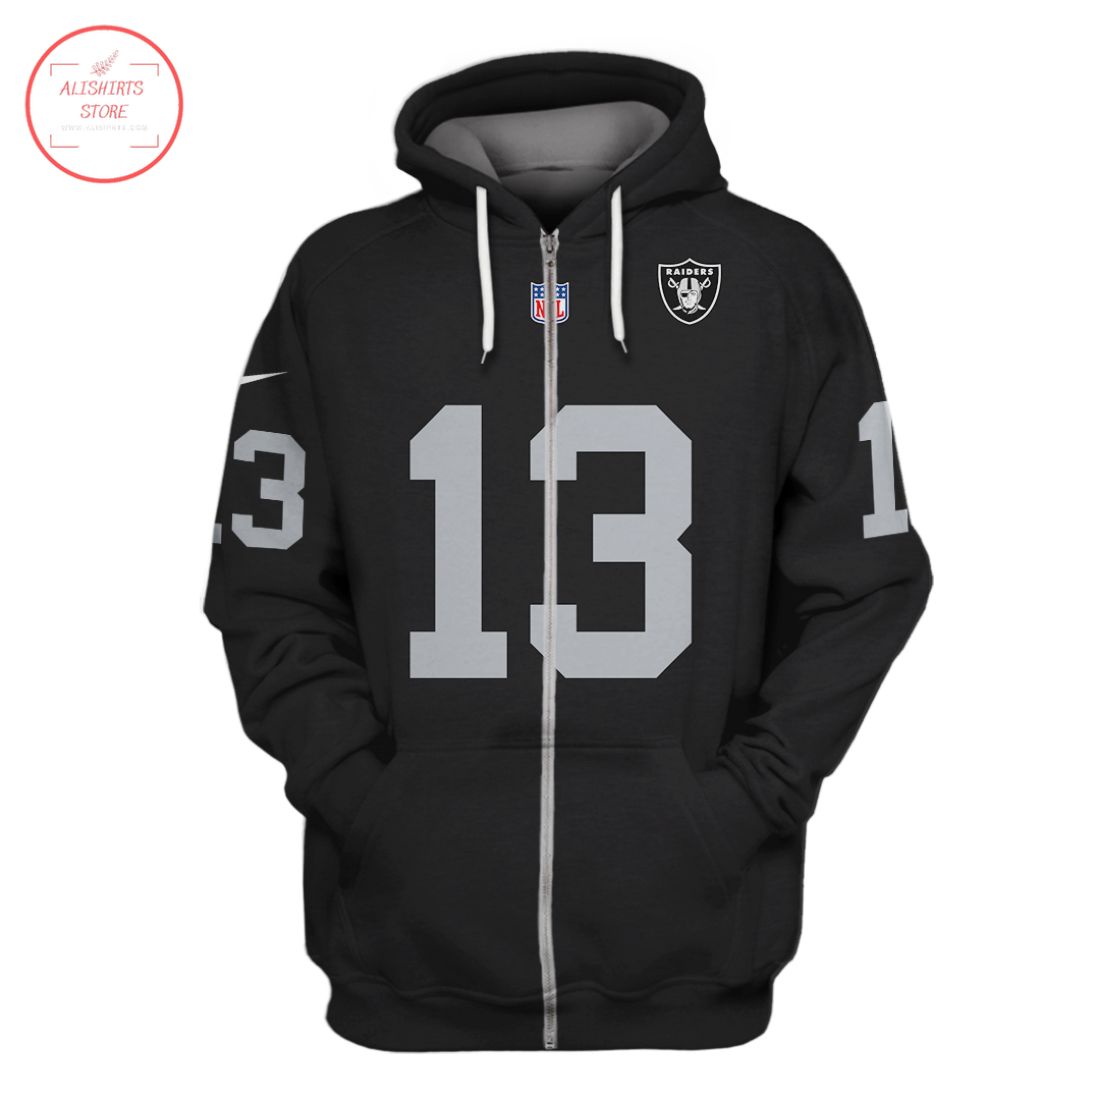 NFL Oakland Raiders Renfrow Black Shirt and Hoodie